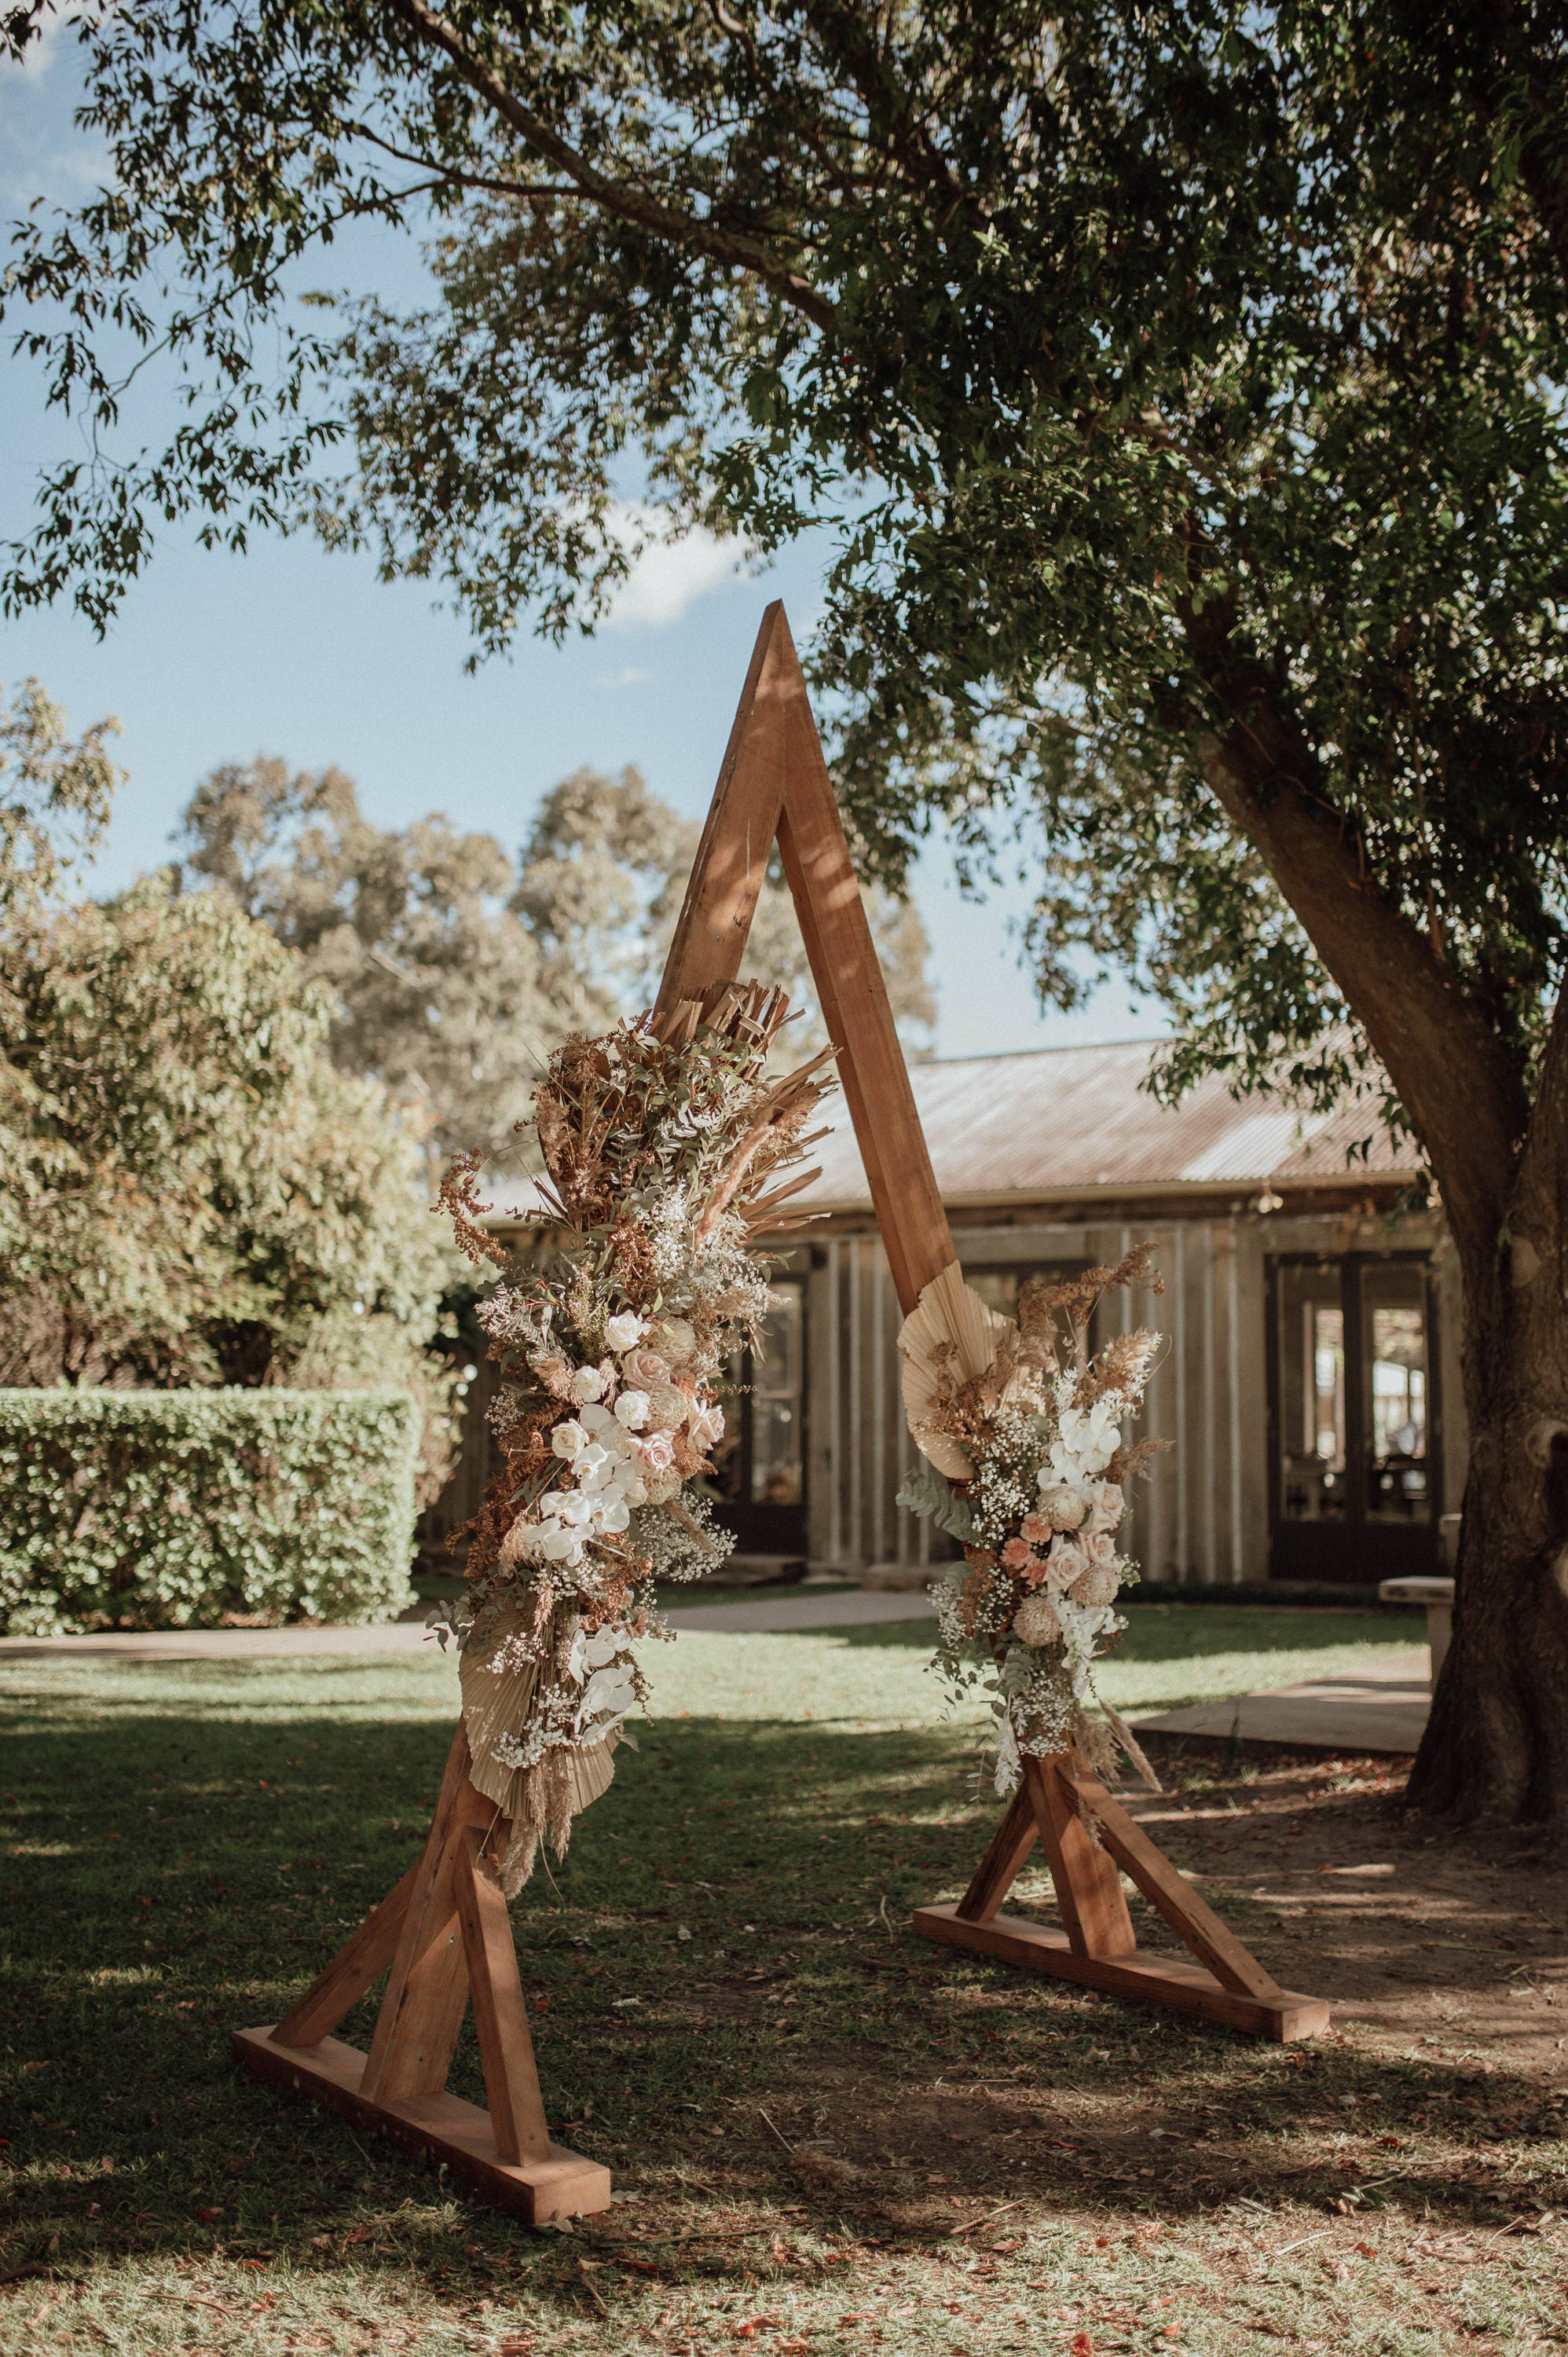 Wooden triangle arbor decorated with white and peach coloured florals